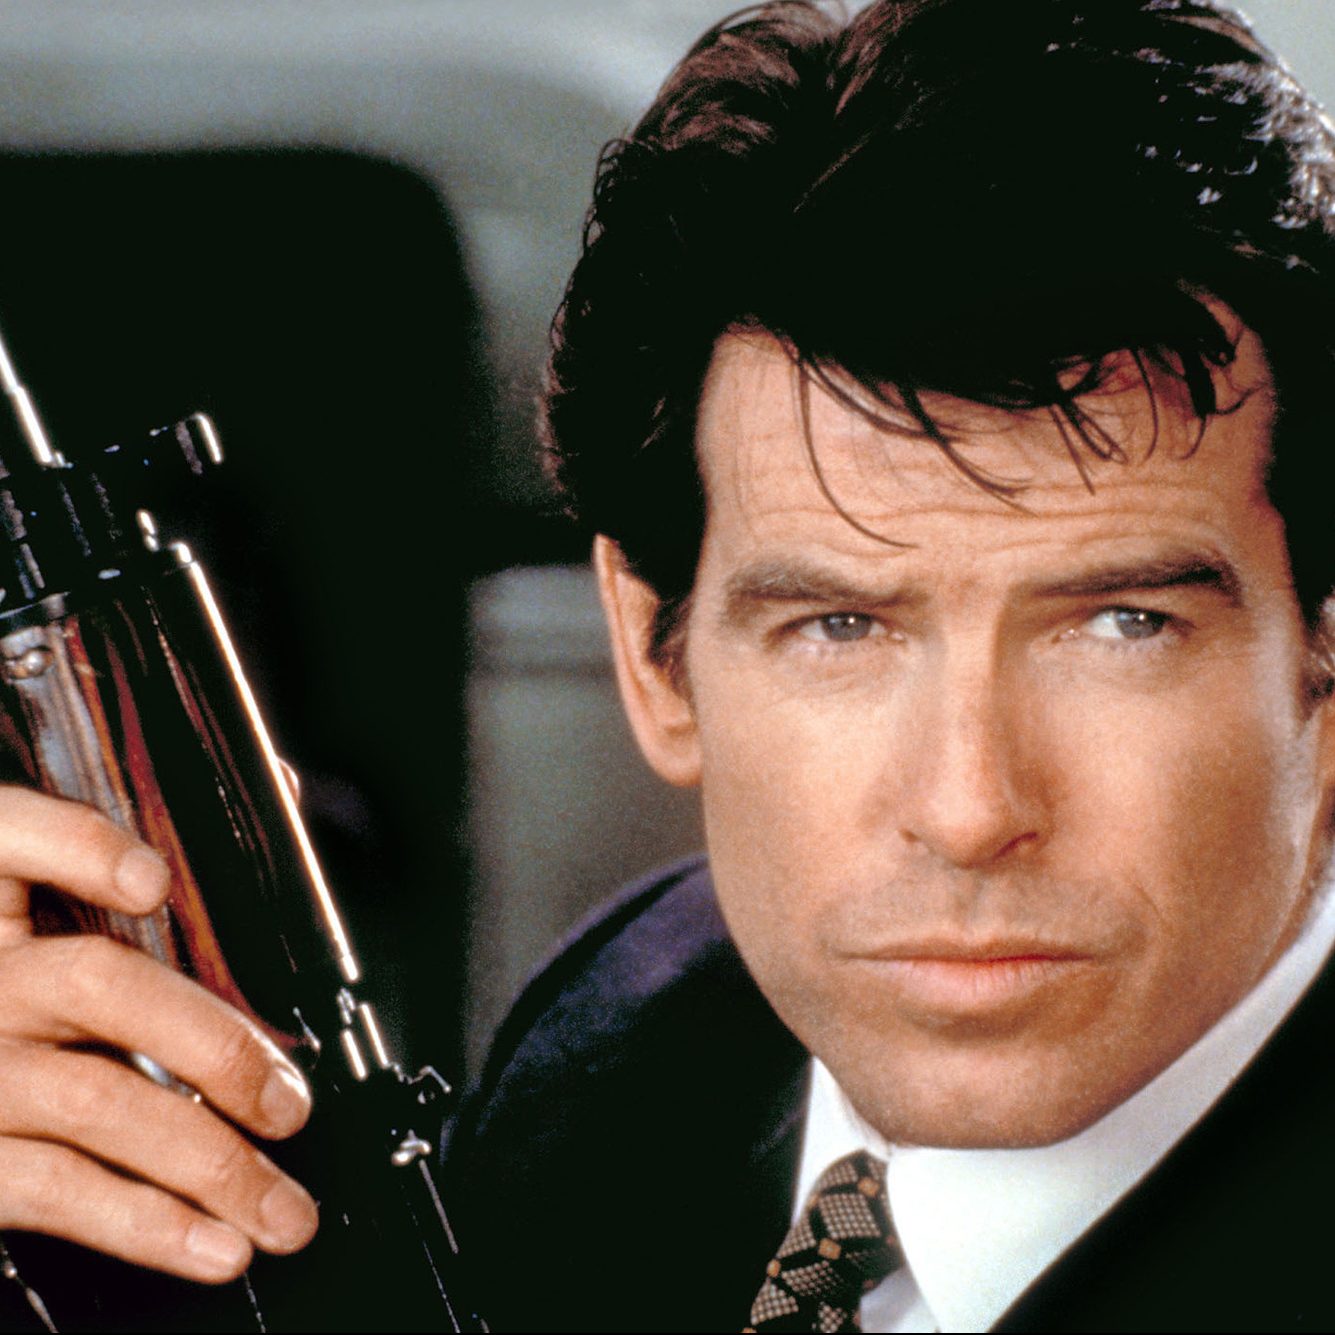 20 Facts About GoldenEye Even A Secret Satellite Couldn't Uncover